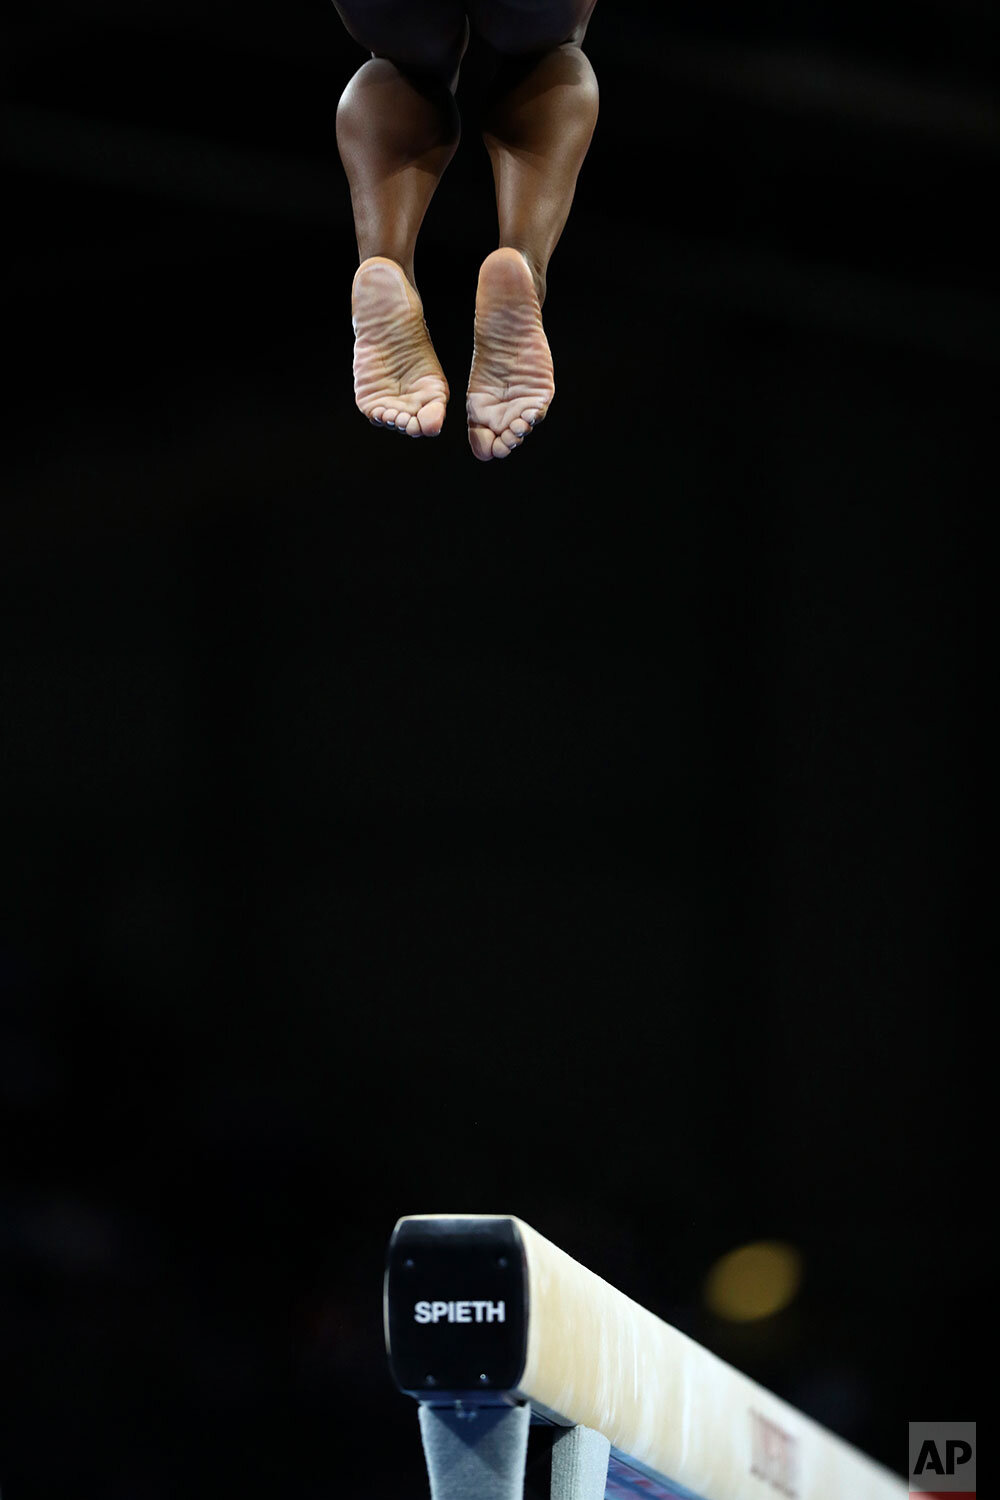  Simone Biles of the United States performs on the balance beam in the women's all-around final at the Gymnastics World Championships in Stuttgart, Germany, Thursday, Oct. 10, 2019. (AP Photo/Matthias Schrader) 